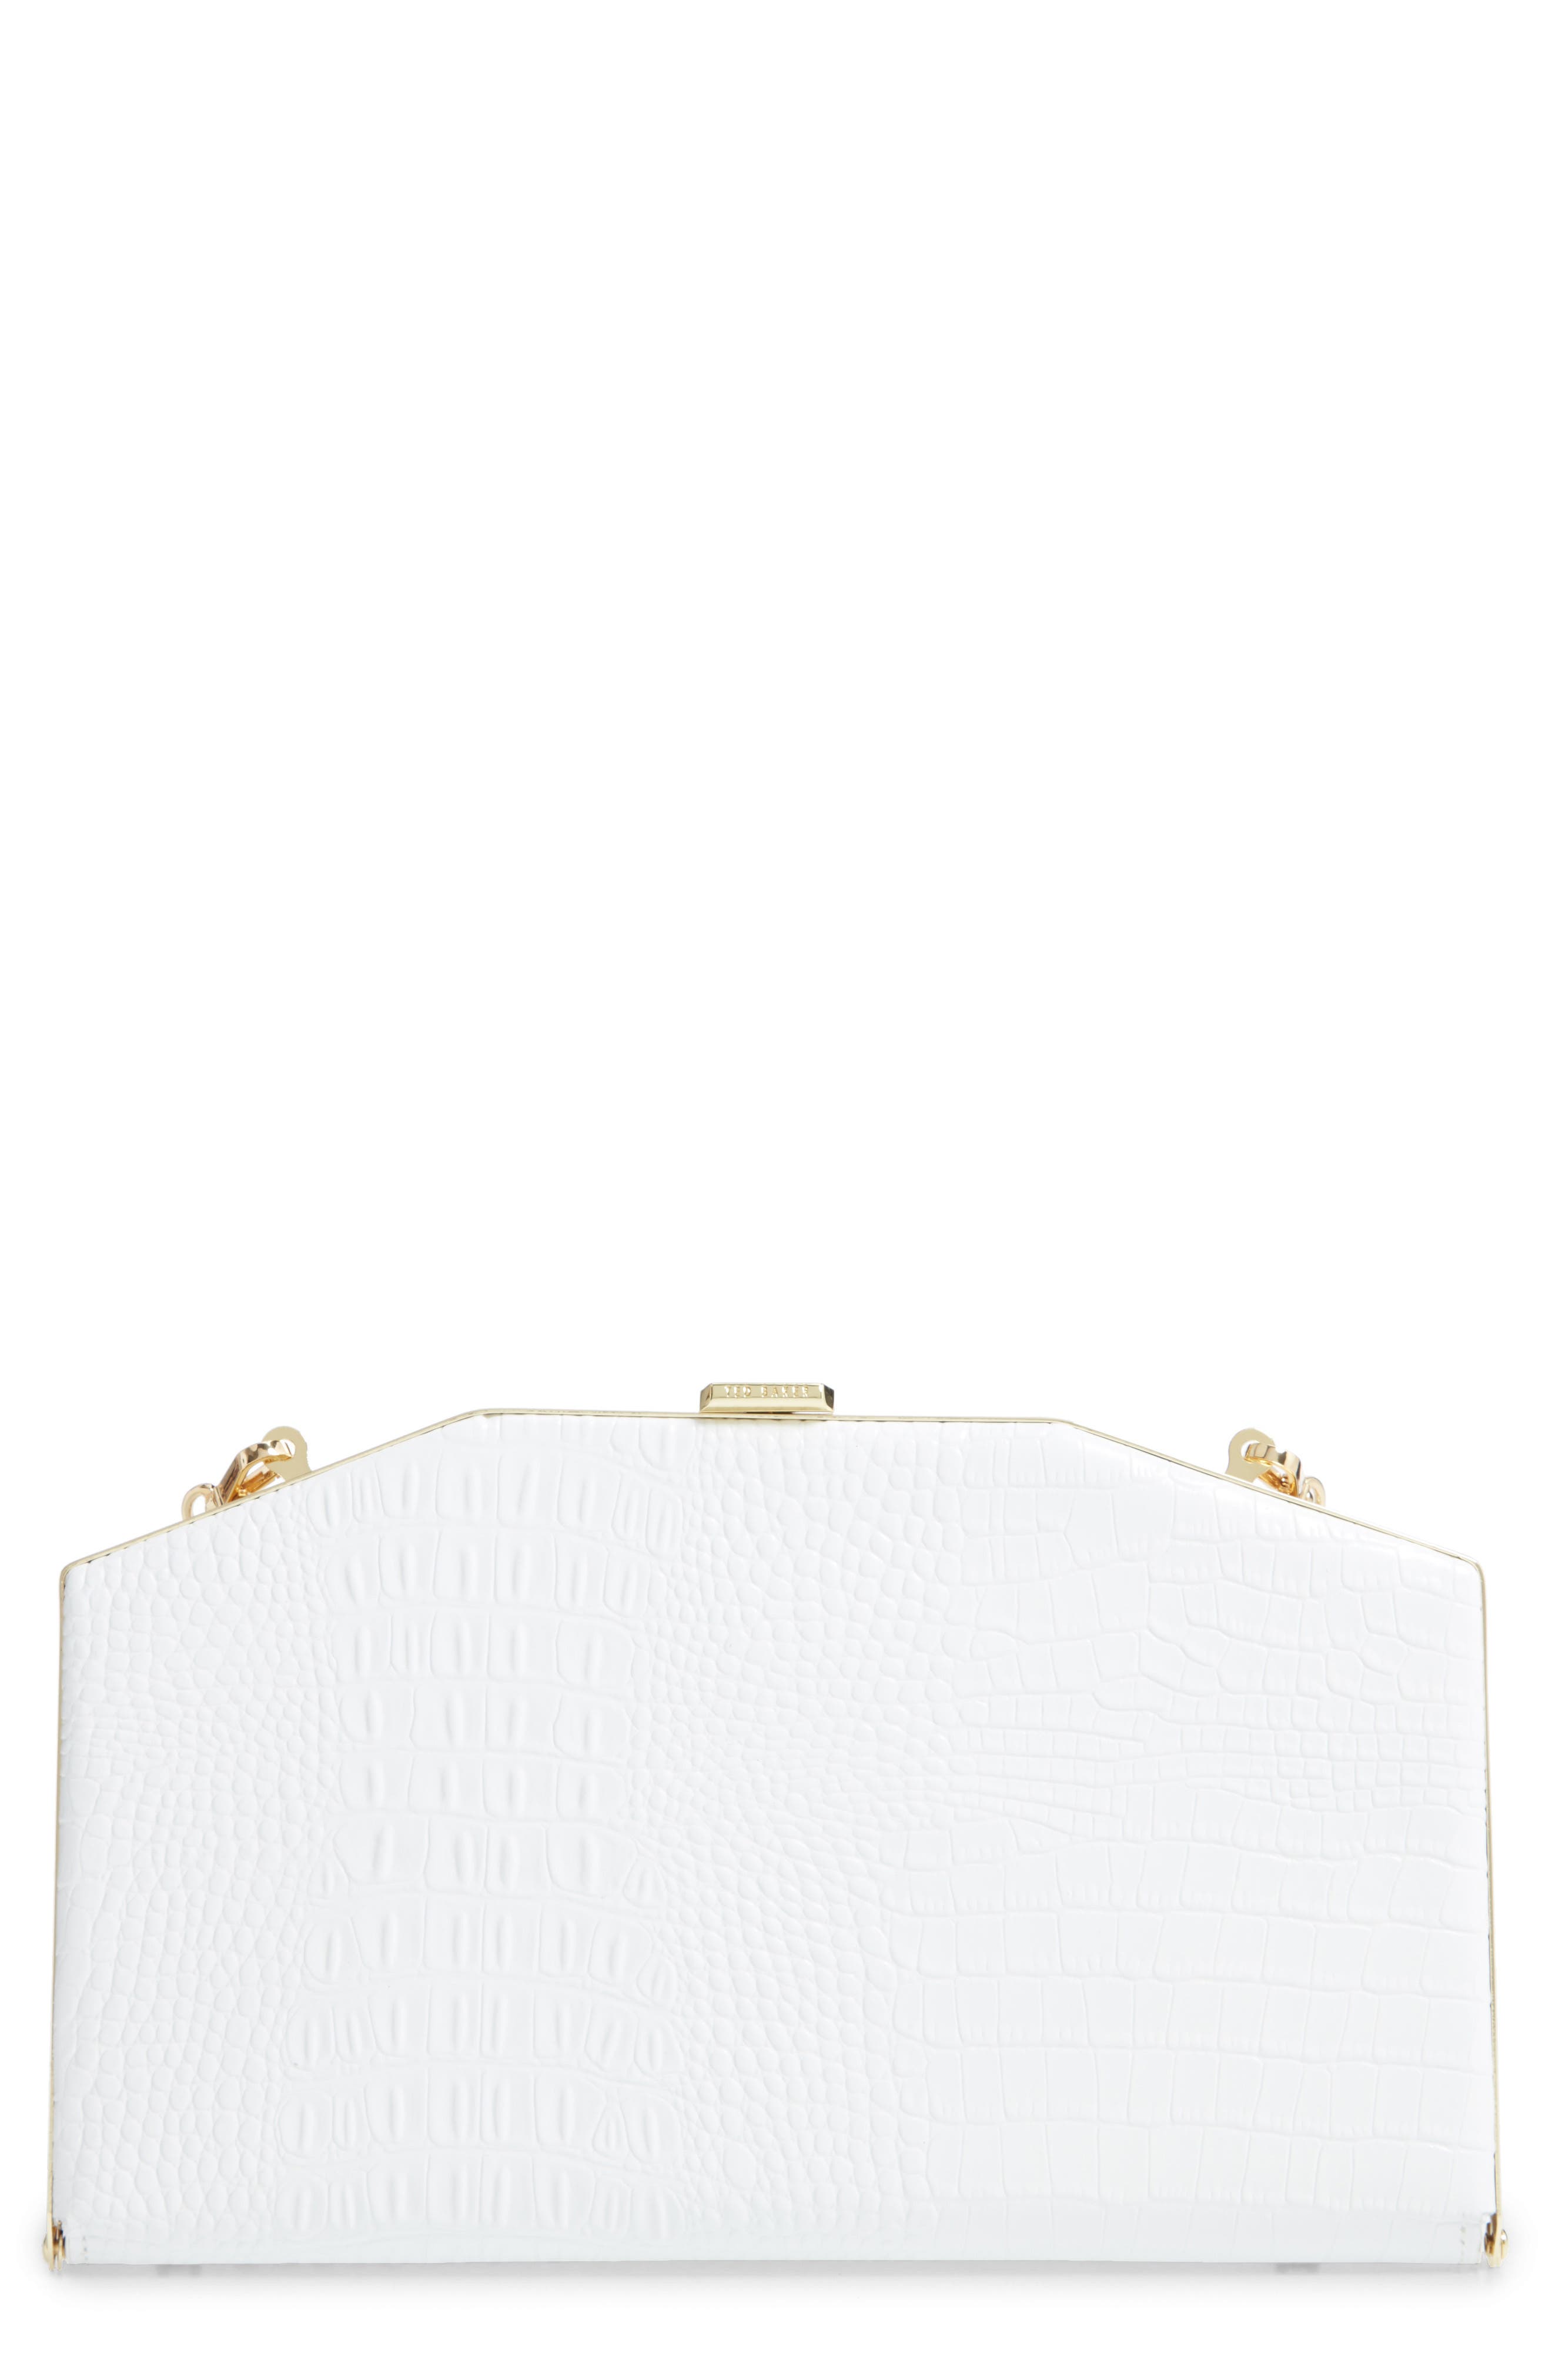 Ted Baker Unae Croc Embossed Leather Clutch In Ivory